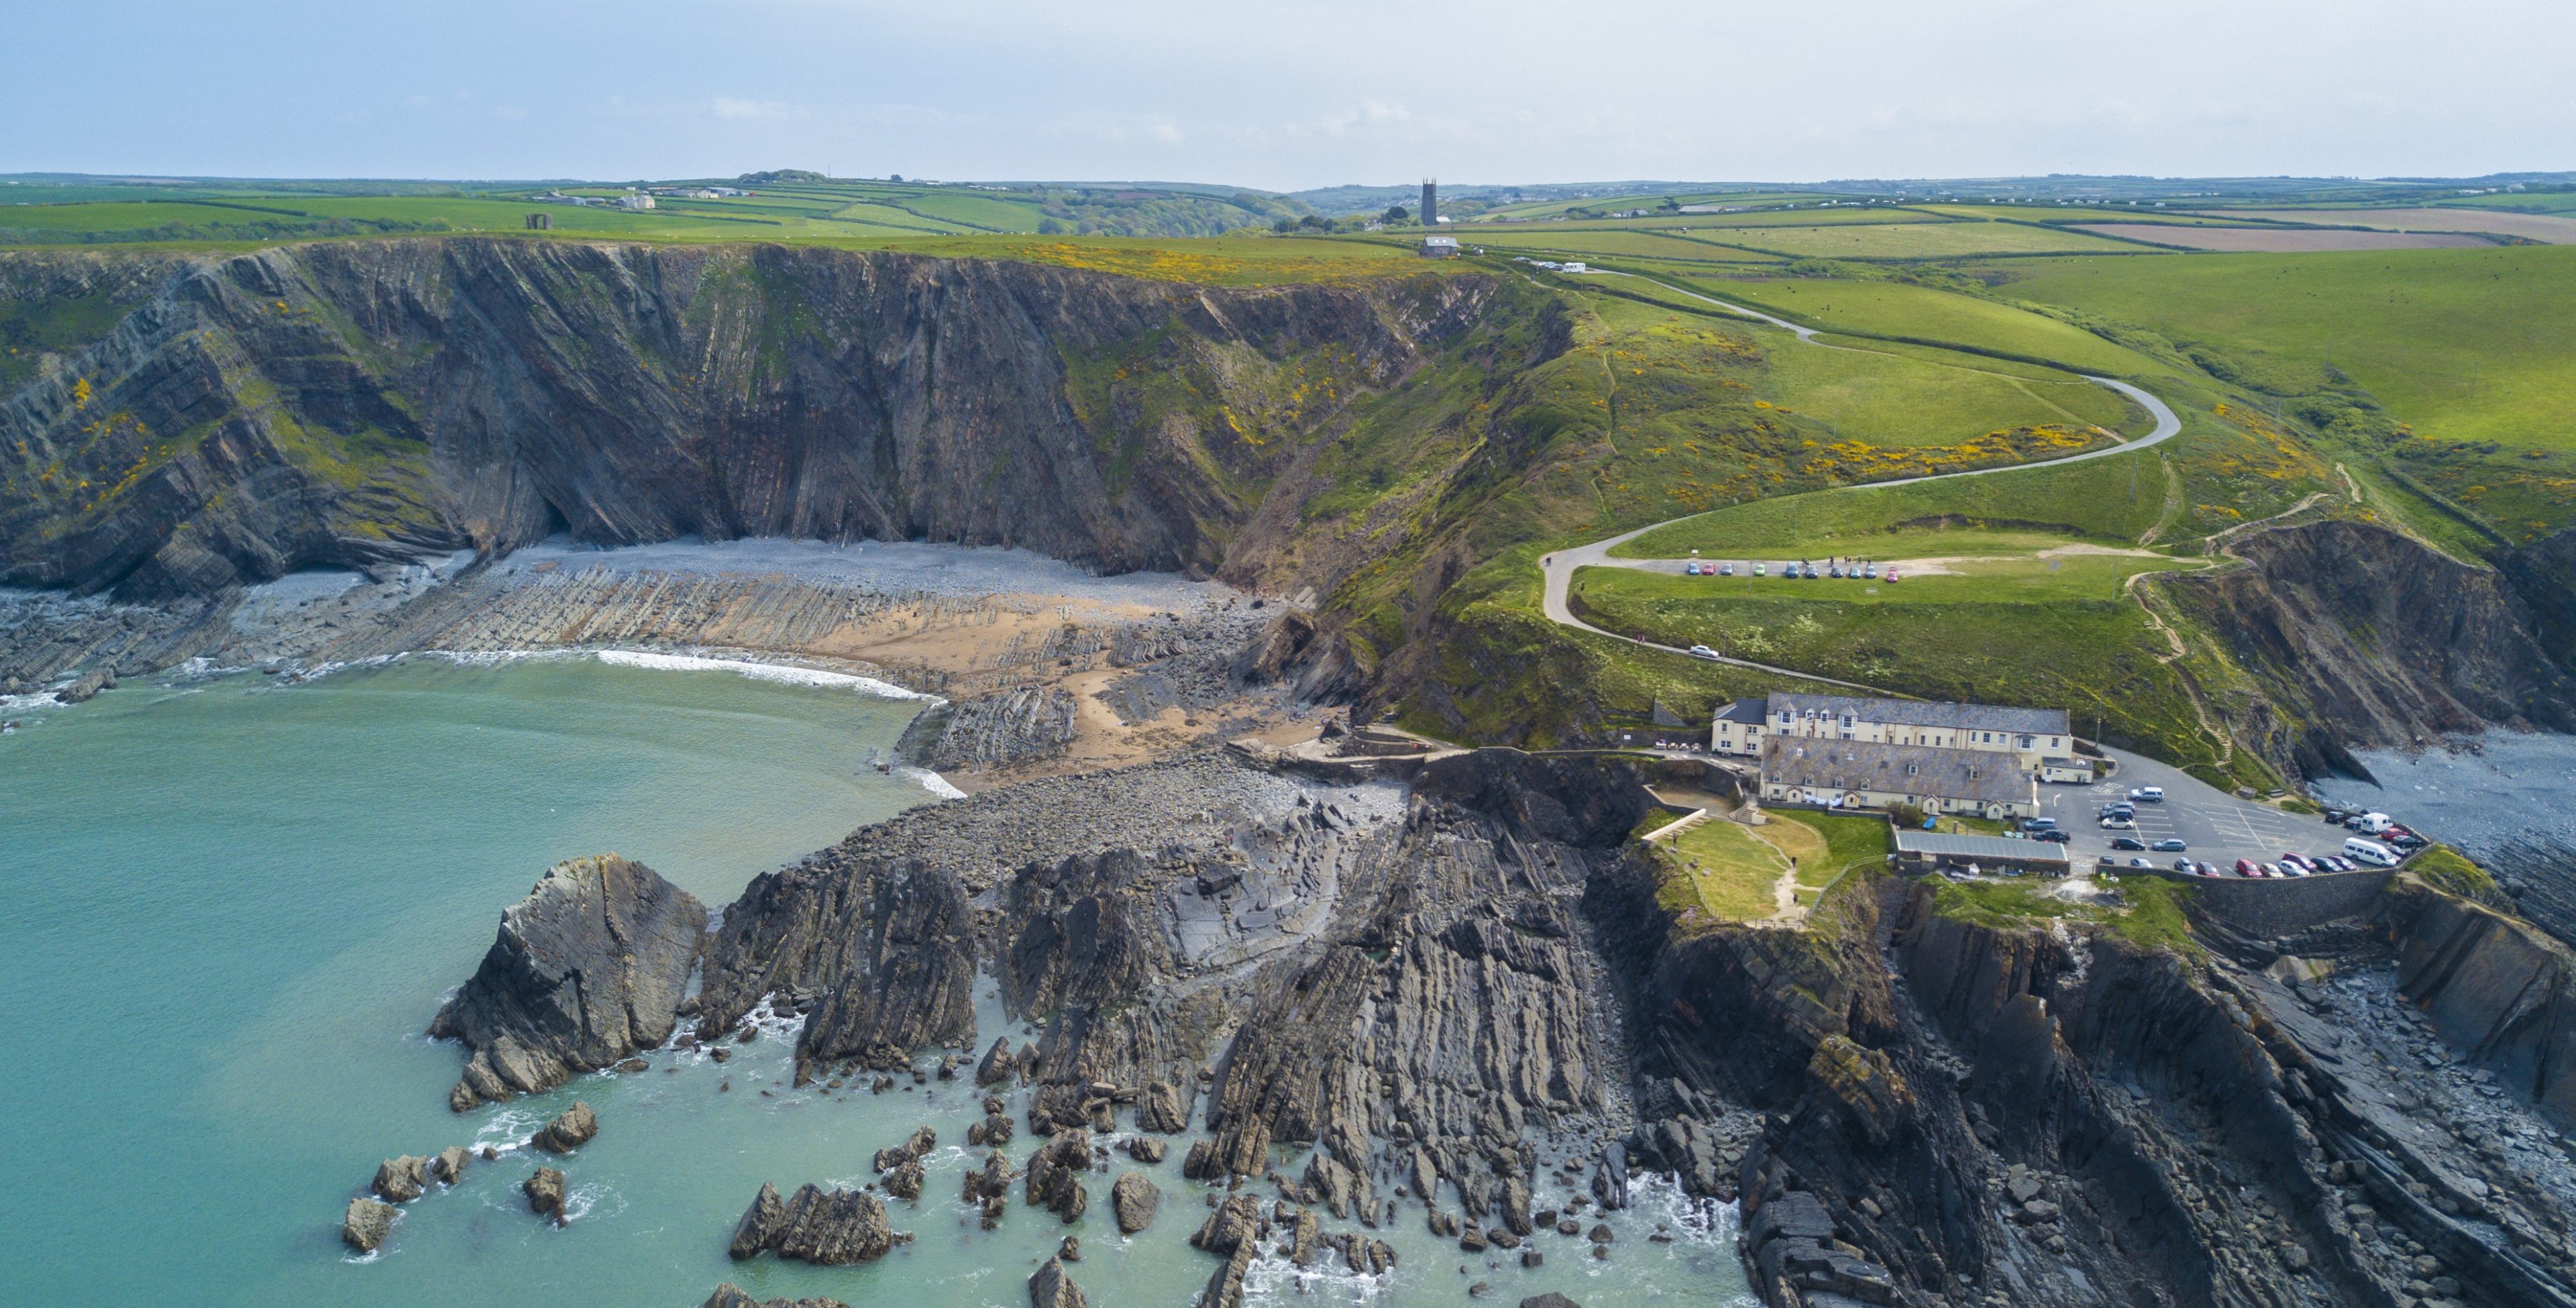 Aerial photo of Hartland Quay and the surrounding area taken from the west